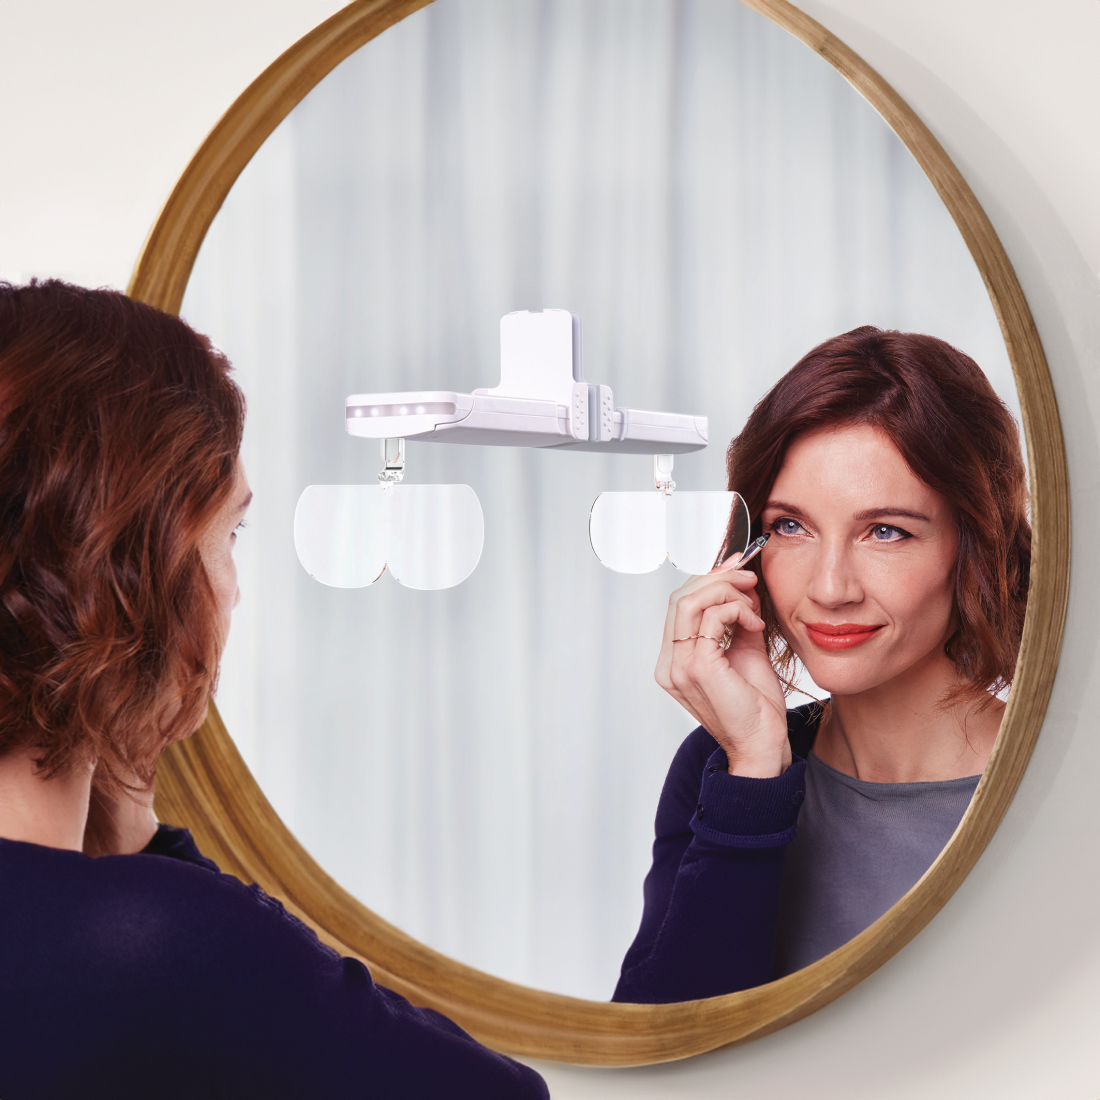 A woman is checking her reflection in a mirror during a grooming session with the Younilook Cosmetic Readers from Michael Todd Beauty.